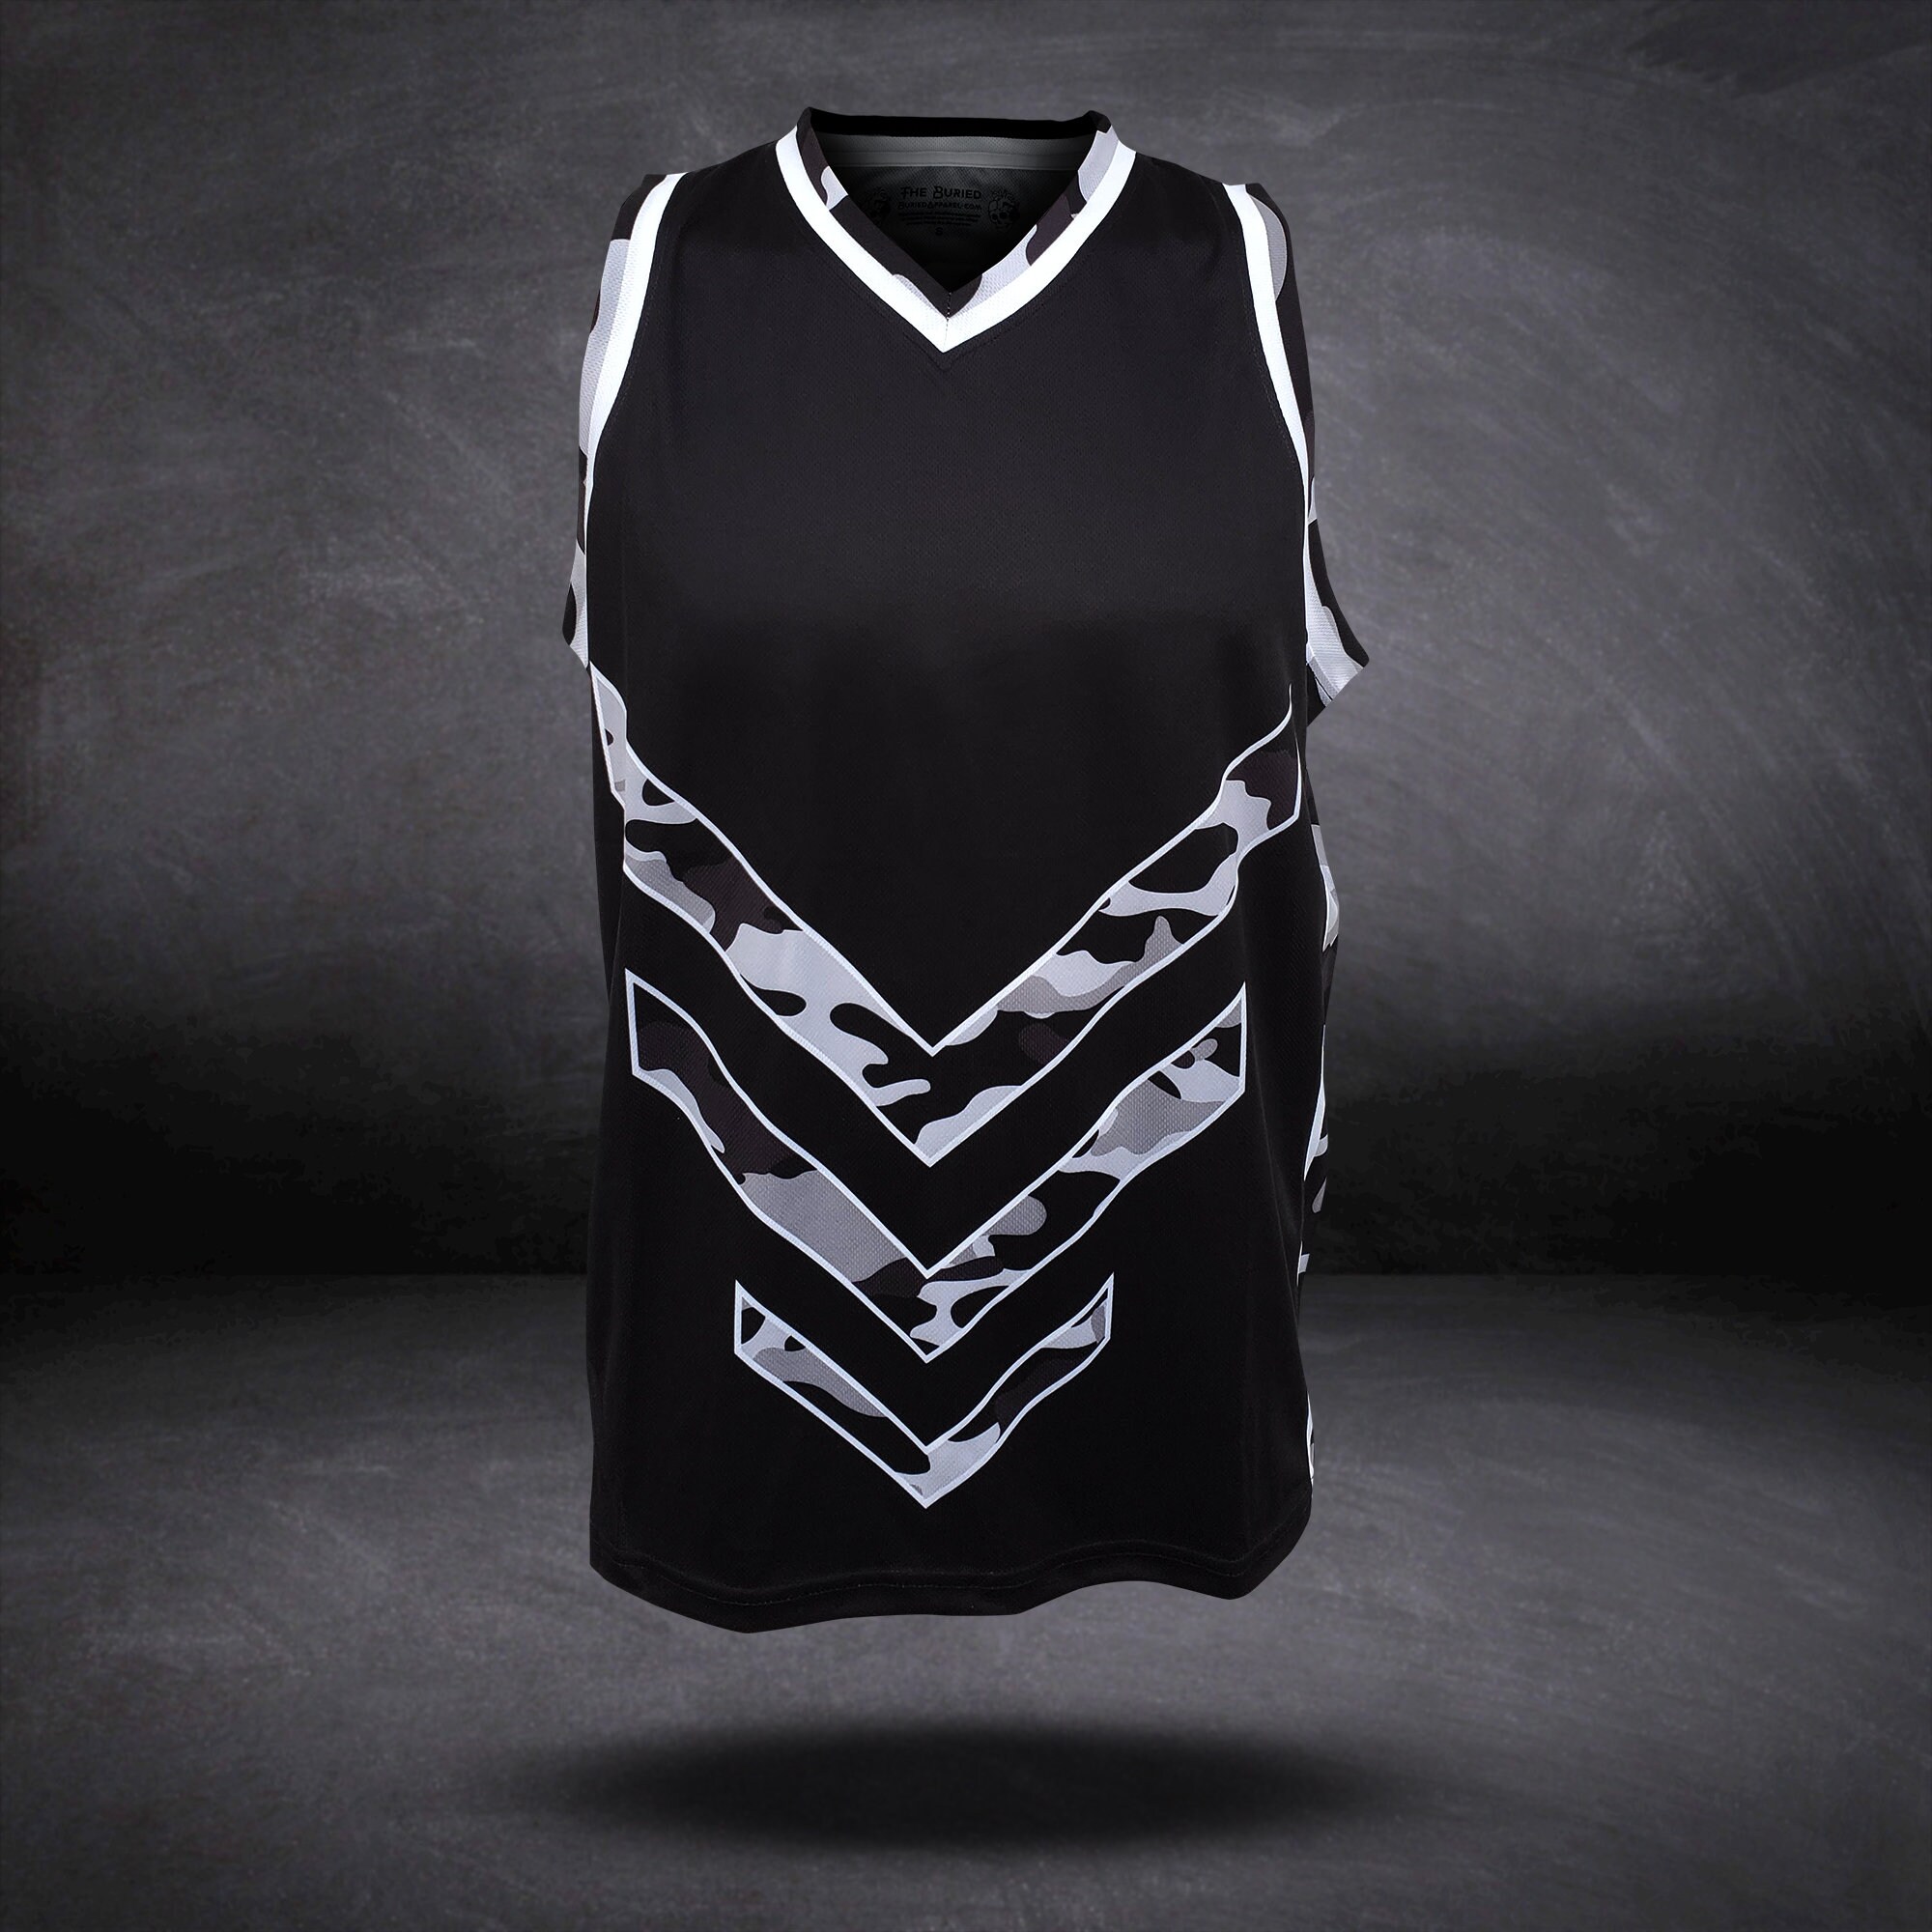 Buy Snow Camo Basketball Jersey Online in India 